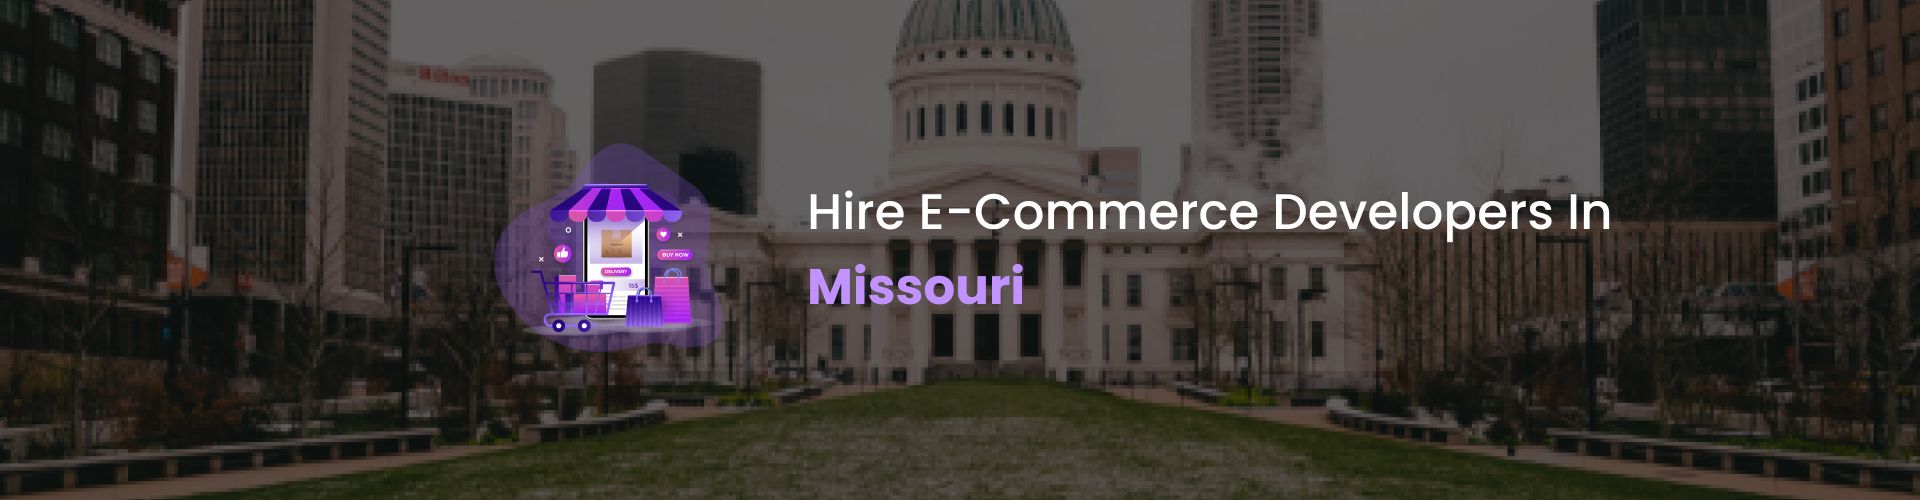 hire ecommerce developers in missouri